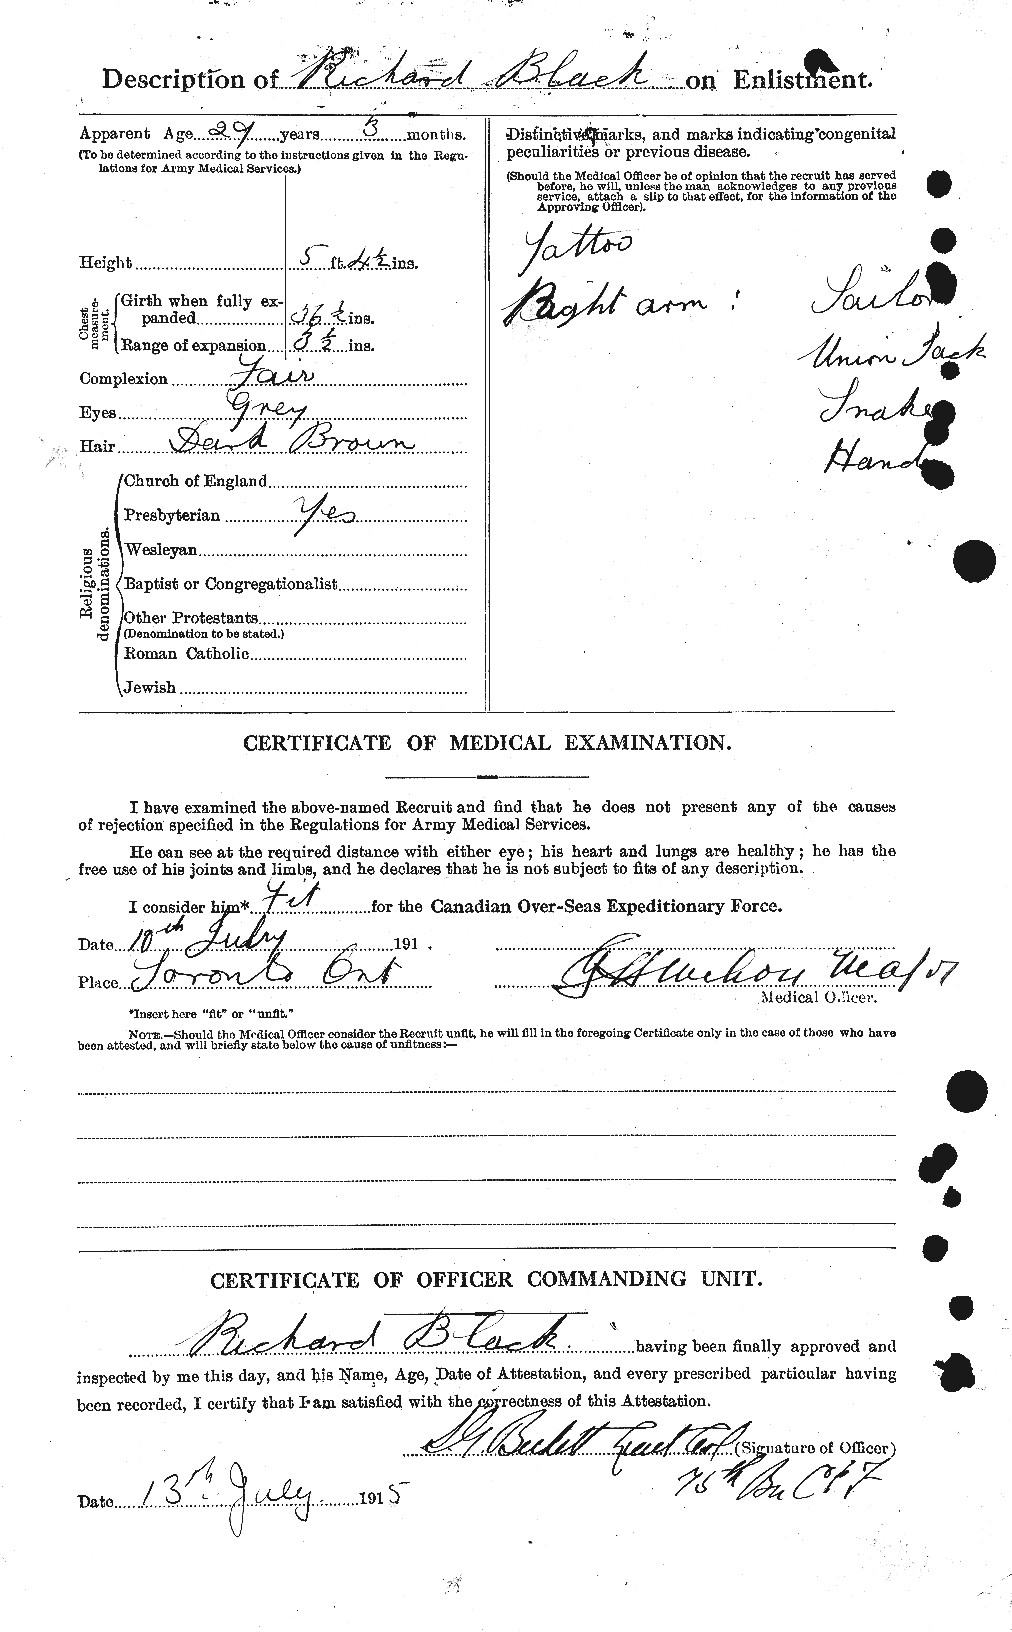 Personnel Records of the First World War - CEF 247563b